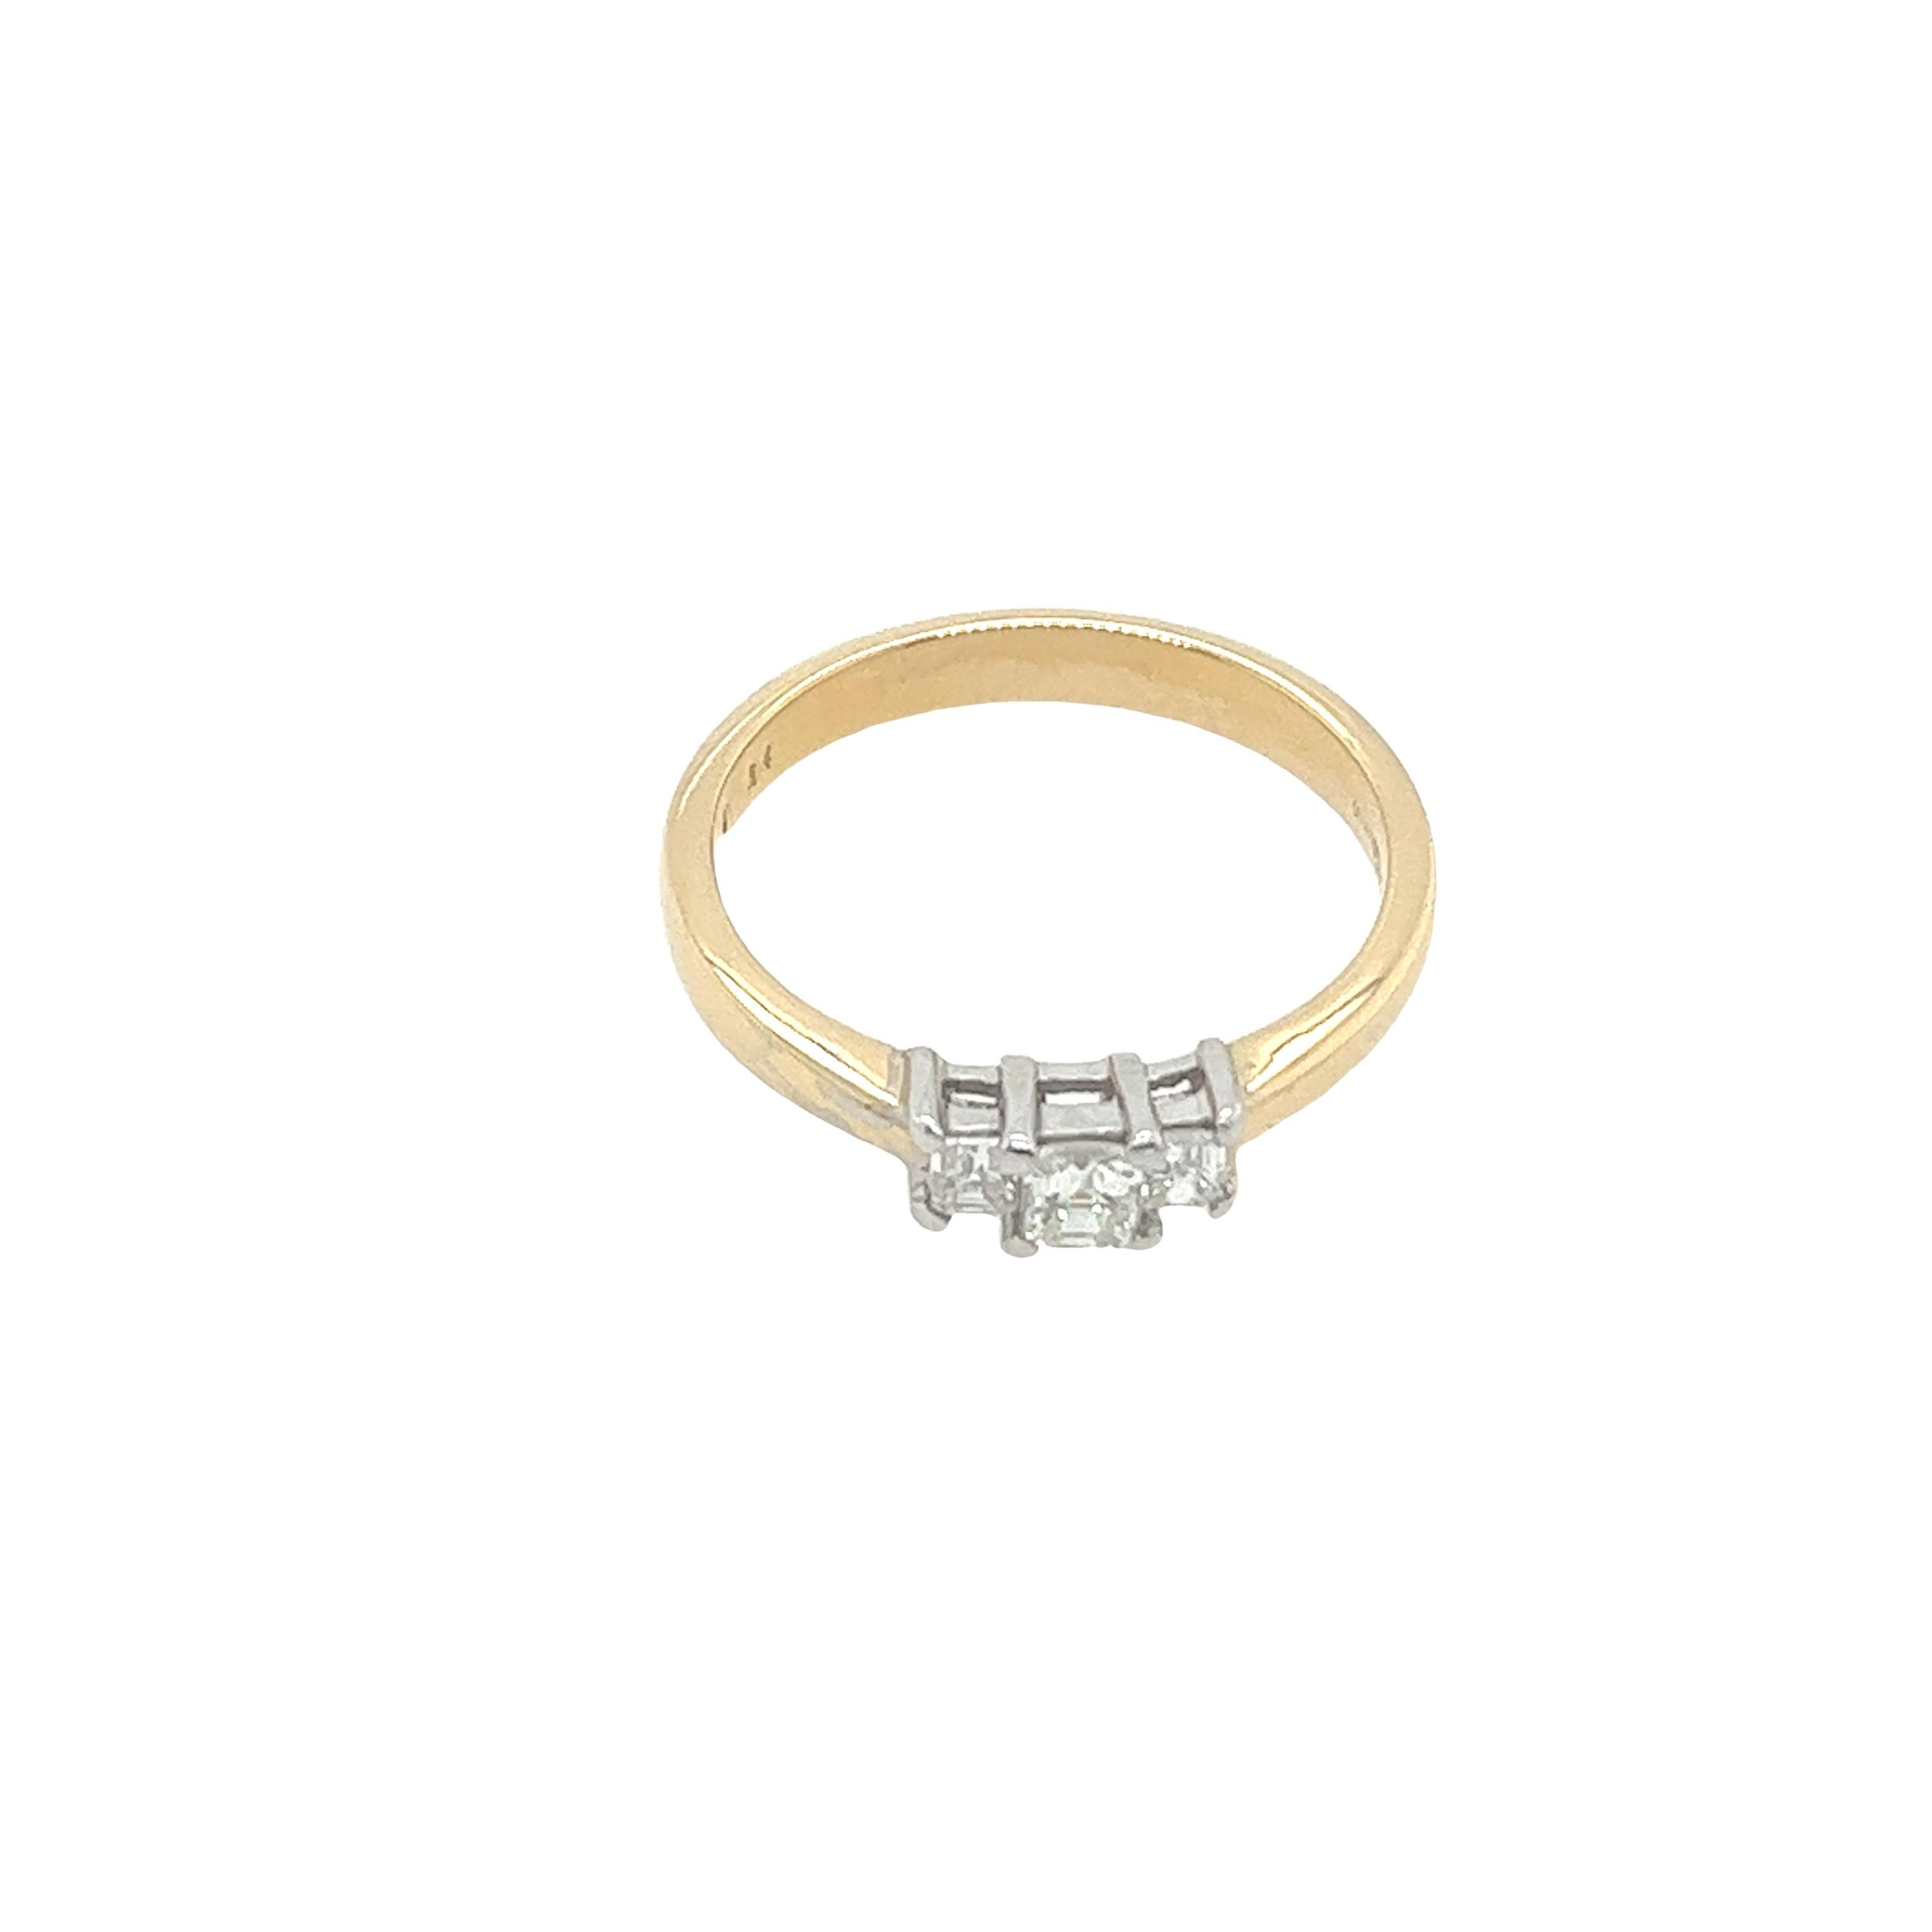 This is a beautiful 3-stone diamond ring with a total weight of 0.35ct square shape diamonds, 
set in 18ct yellow & white gold. The trilogy ring set is the symbol of love and eternity. 
Total Diamond Weight: 0.35ct
Diamond Colour: H
Diamond Clarity: